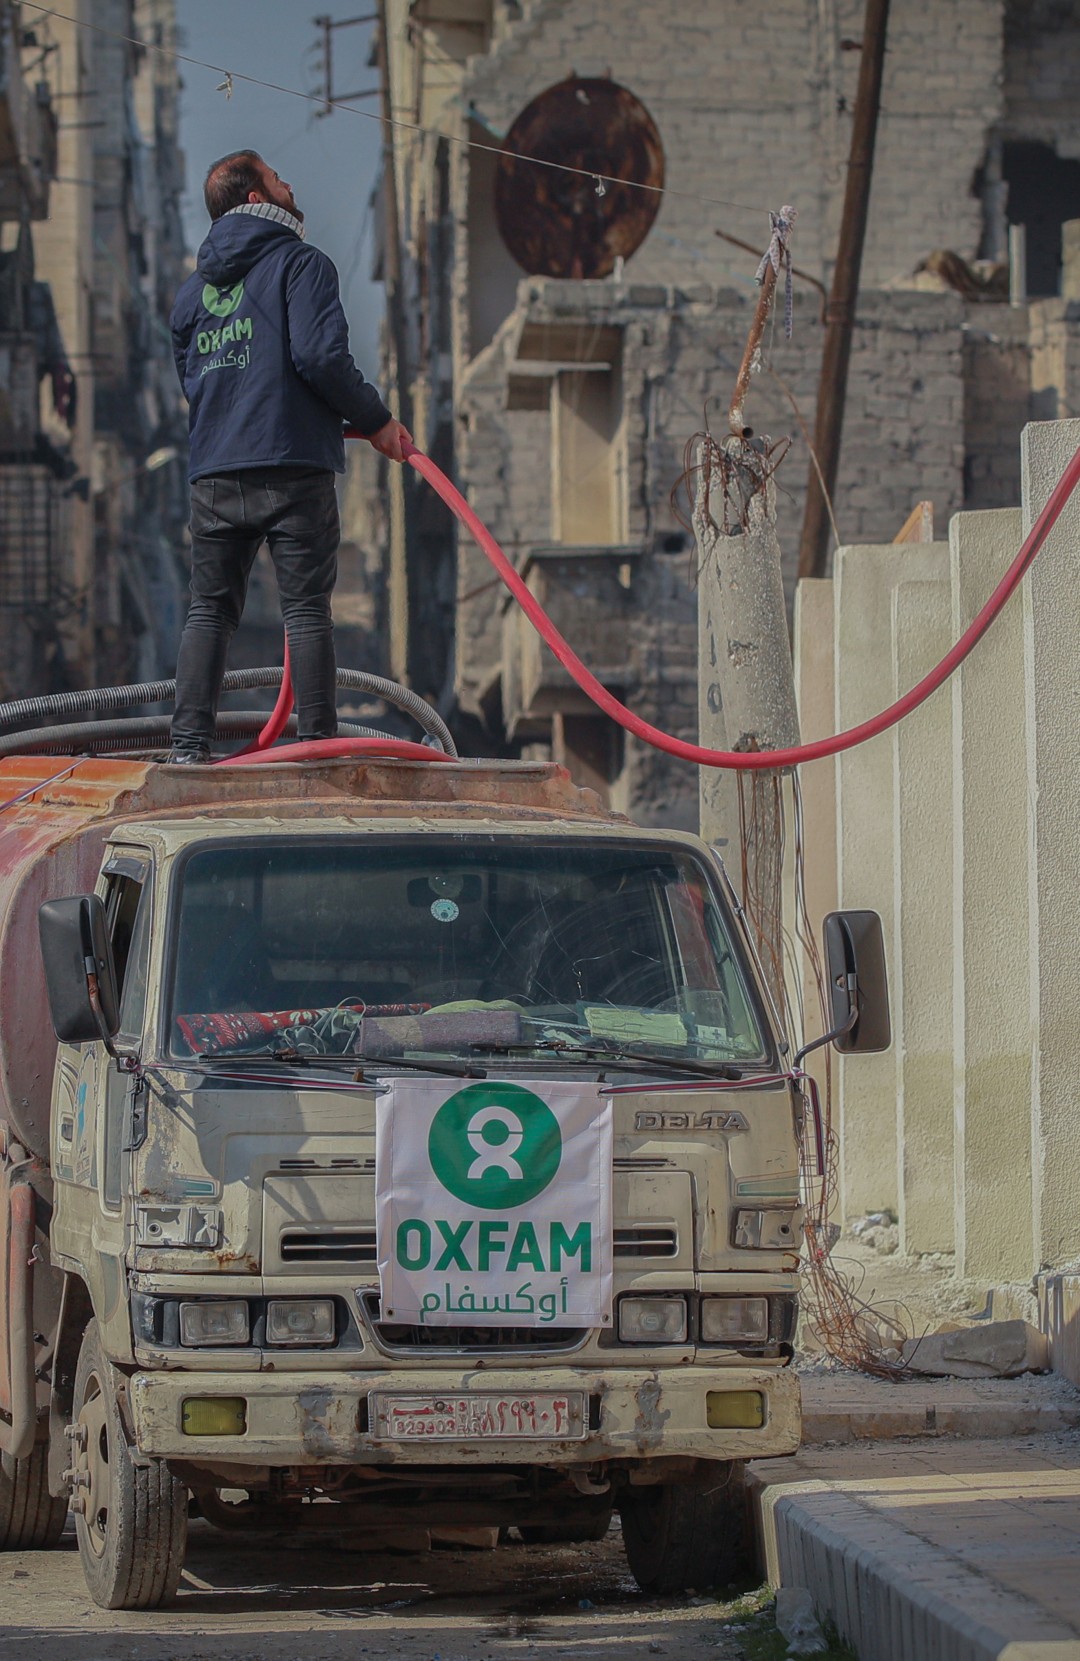 Oxfam is shown in the pictures delivering water to shelters in Aleppo city.